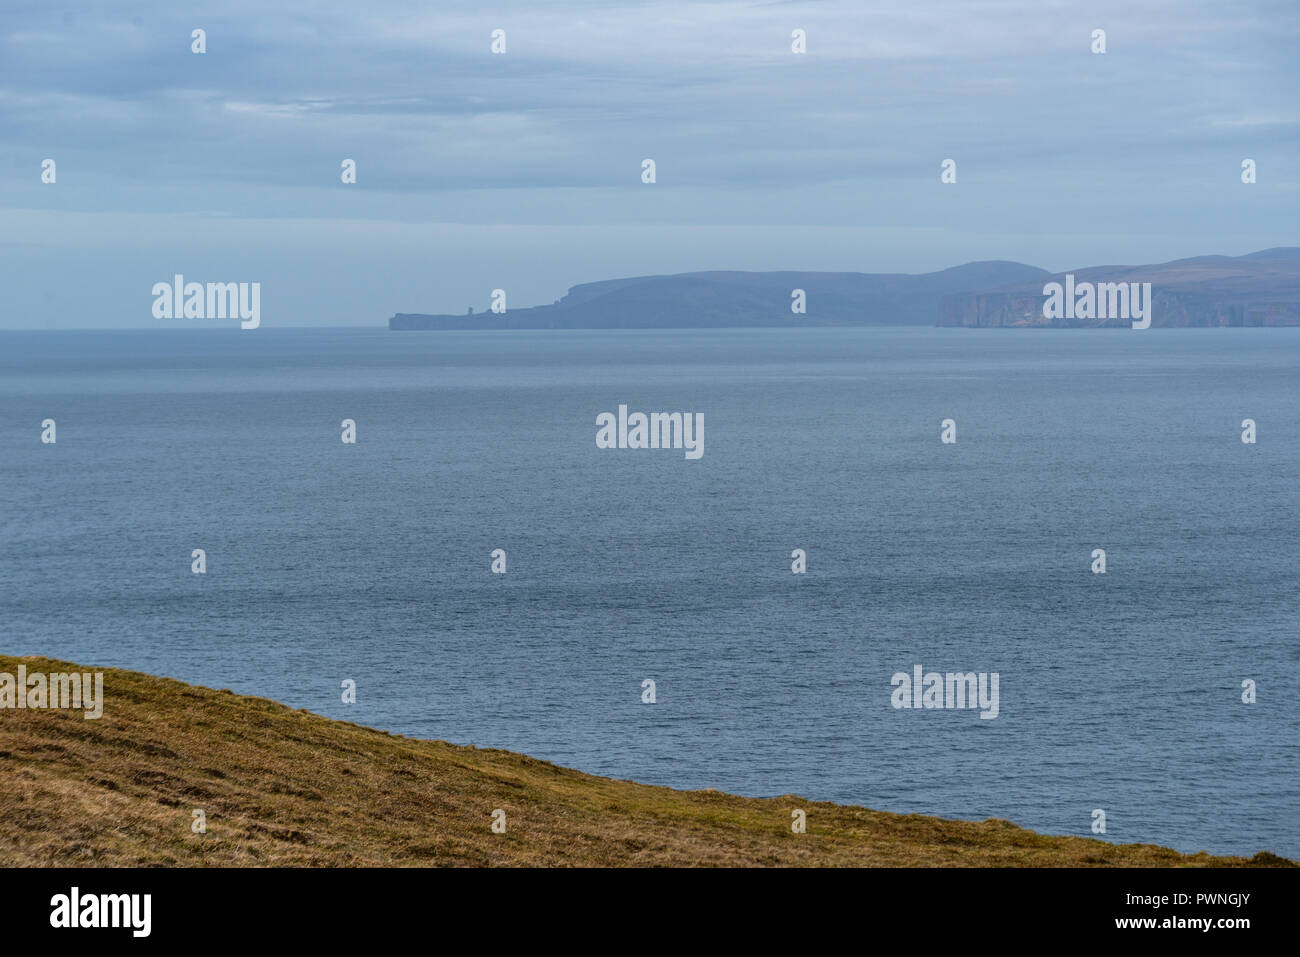 Lighthouse, Dunnet Head, Island of Stroma in the background, north coast, Scotland, Uk Stock Photo